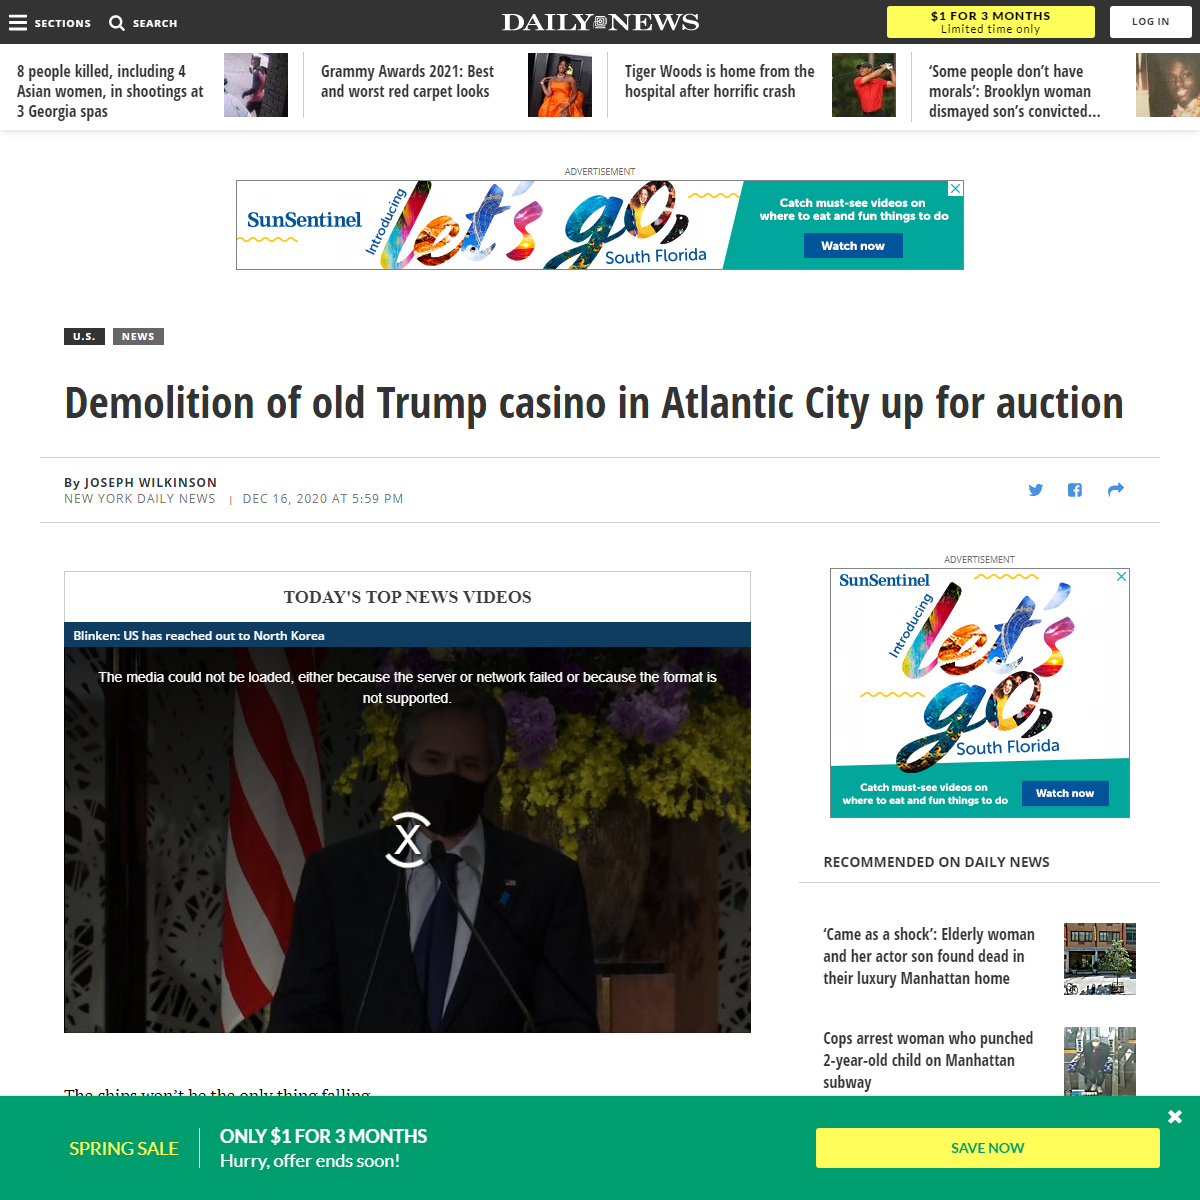 A complete backup of https://www.nydailynews.com/news/national/ny-trump-atlantic-city-casino-demolition-auction-20201216-pp3vaai